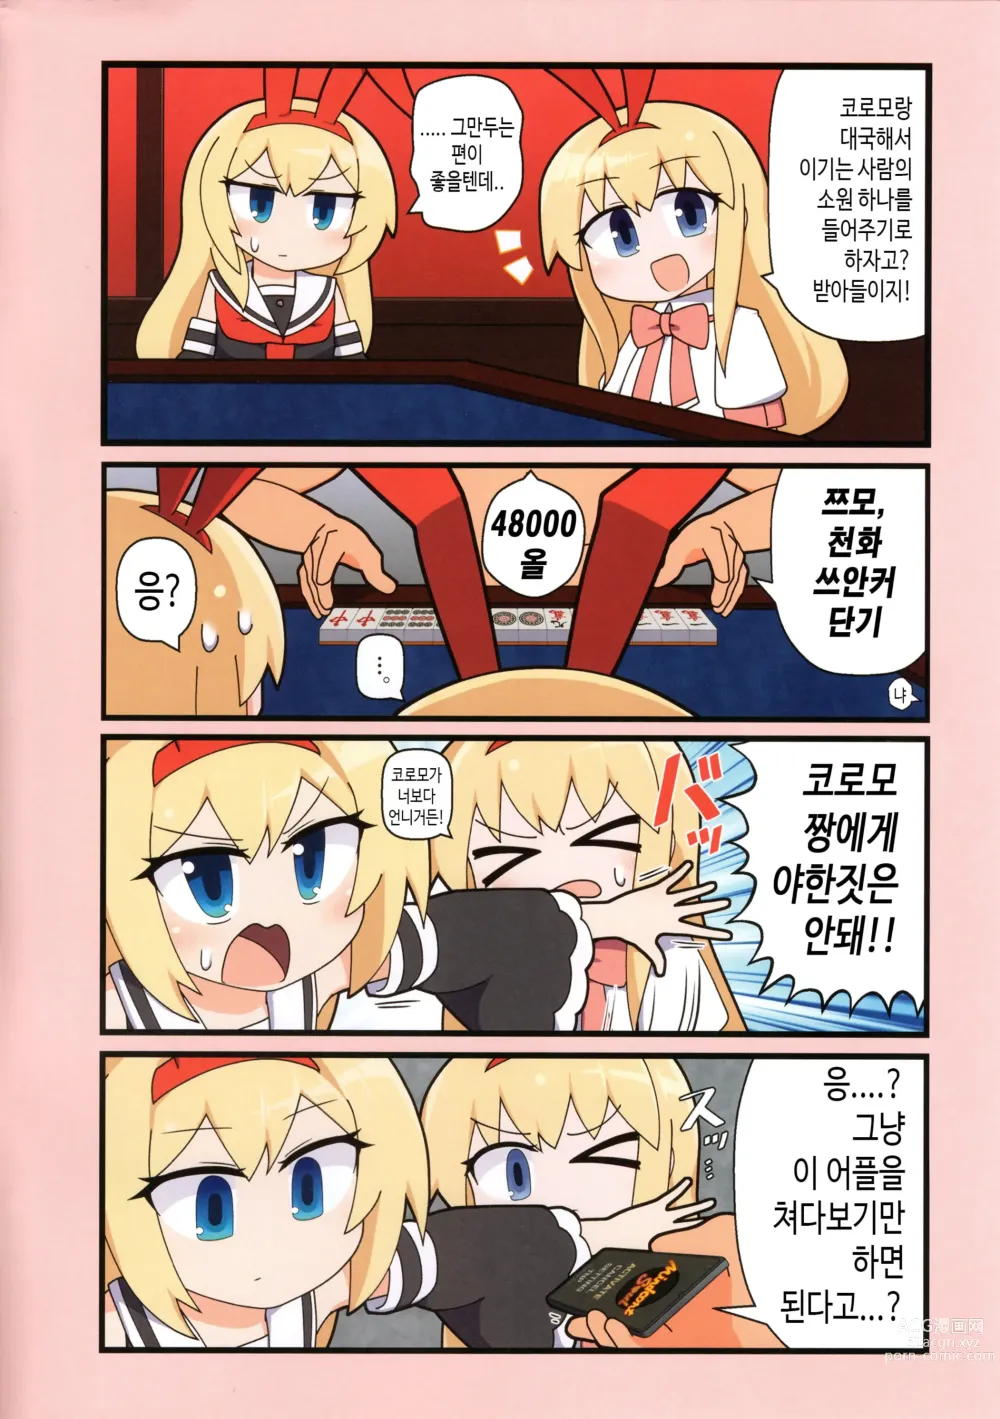 Page 2 of doujinshi 에로냥텐 5